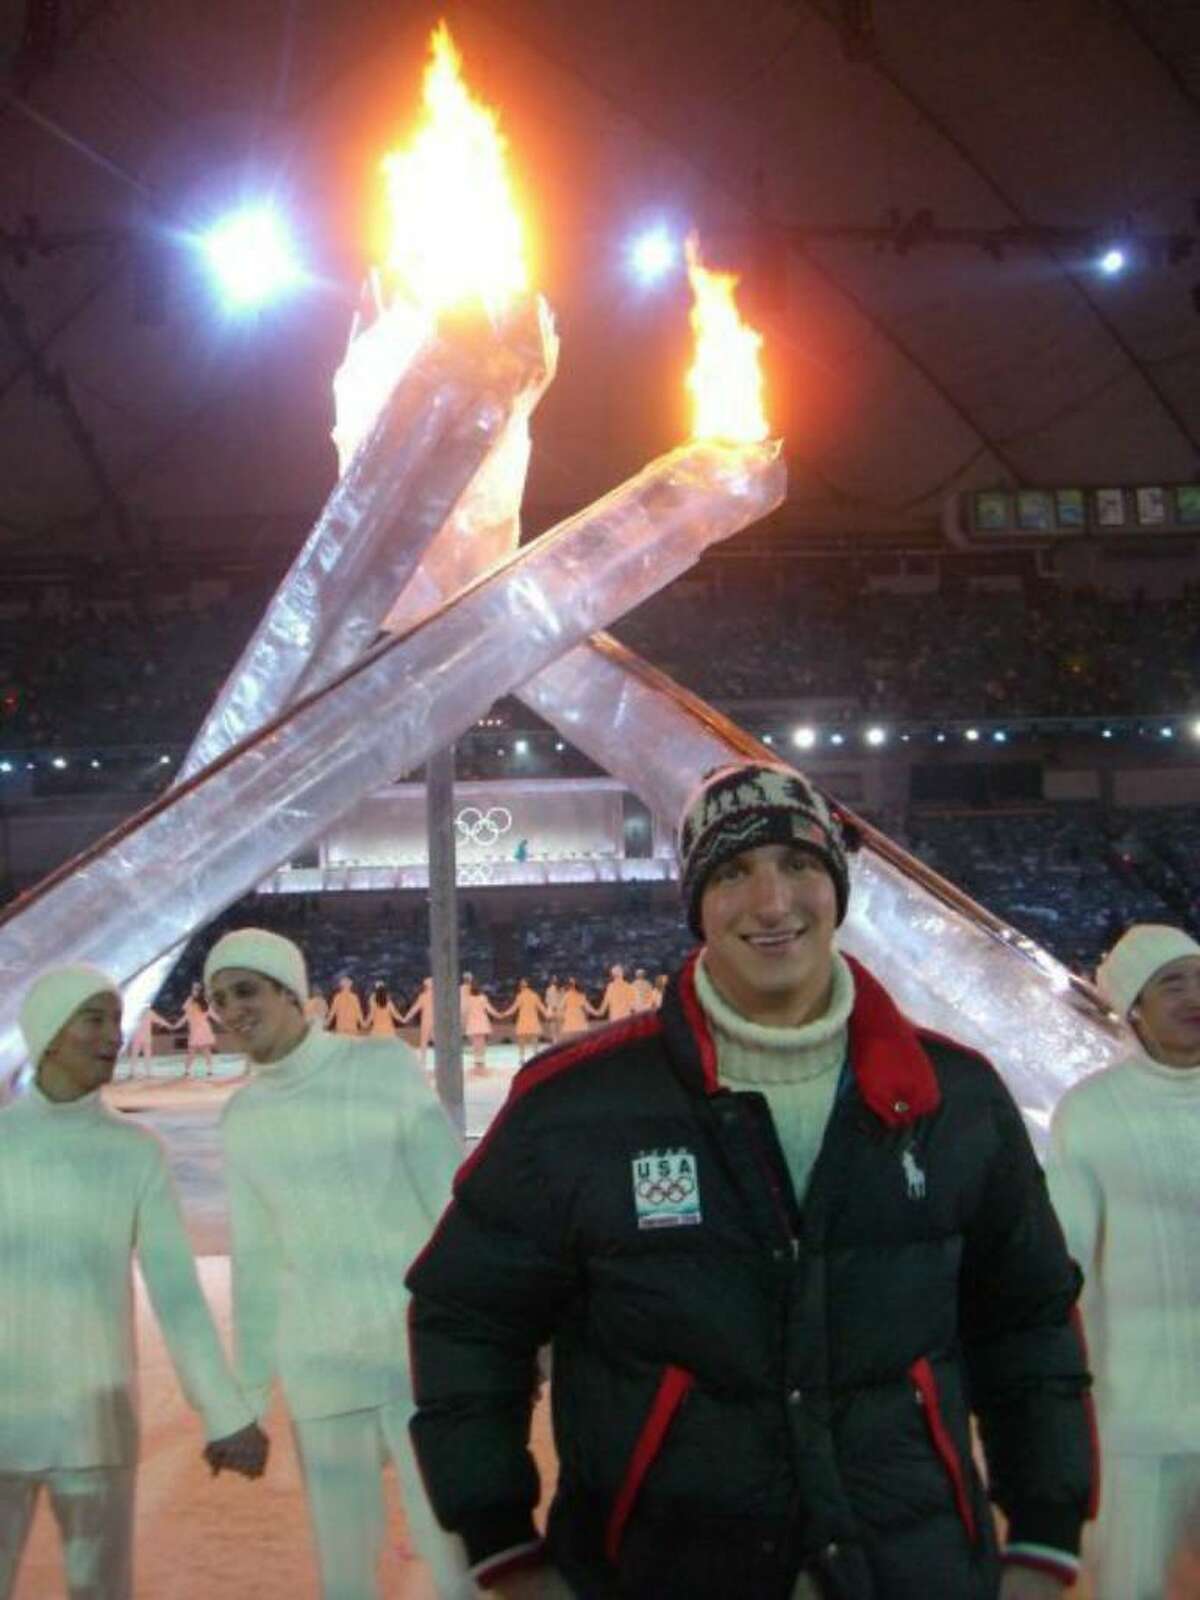 John Napier of Schenectady stands at the Olympic torch in Vancouver, Canada. He will join fellow soldiers now serving in the Vermont National Guard units in Afghanistan. (Courtesy John Napier)